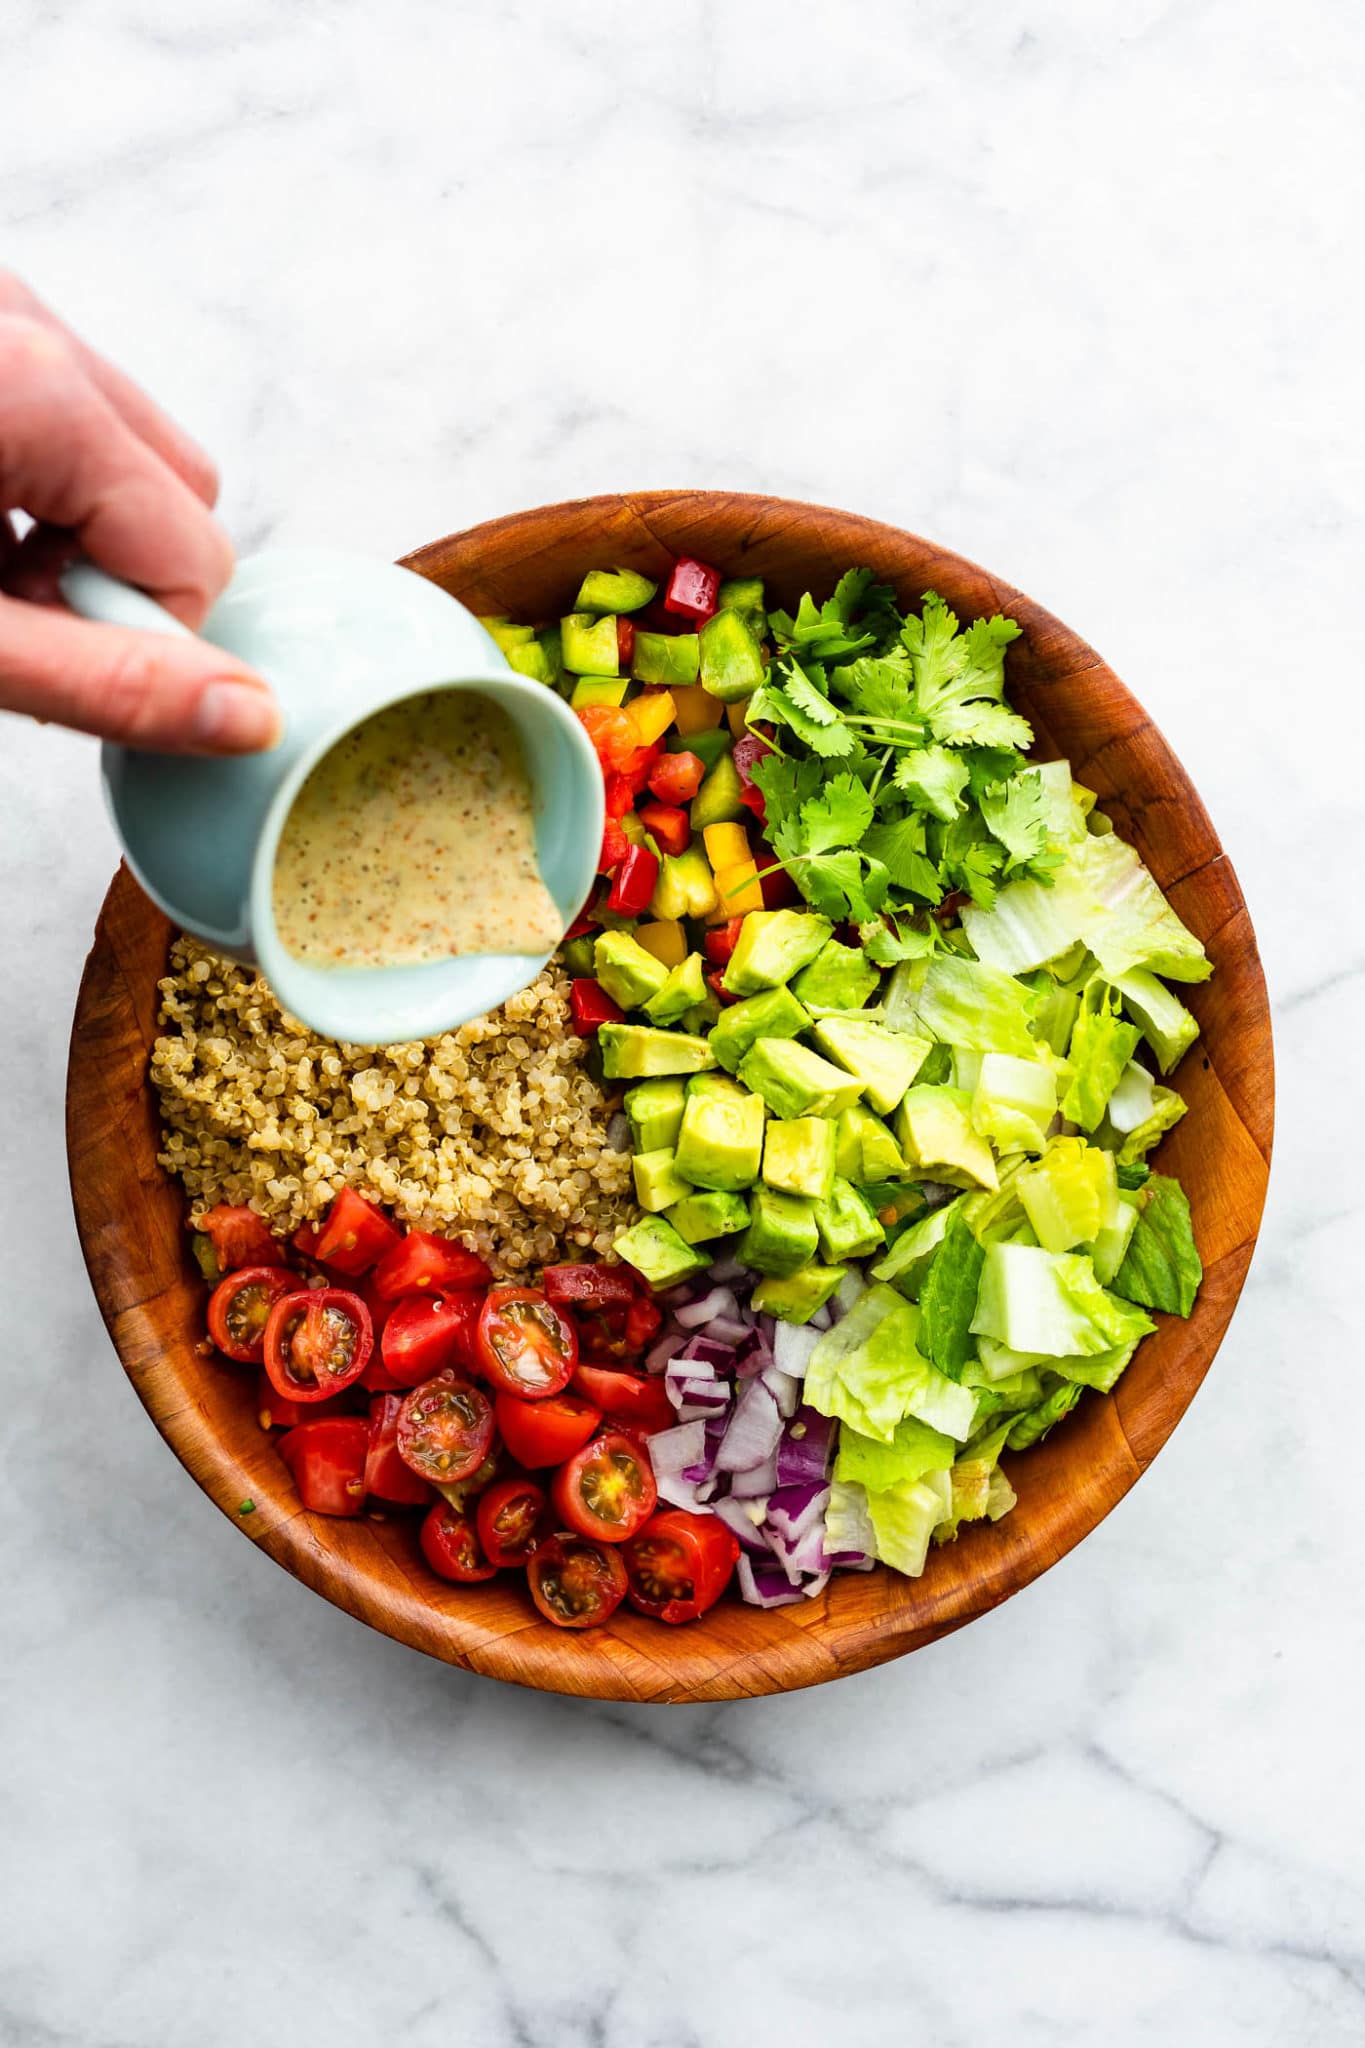 a bowl of ingredients for fiesta quinoa salad including quinoa, bell peppers, cilantro, avocado, romaine, red onion, and tomatoes with a hand pouring spicy dressing on top